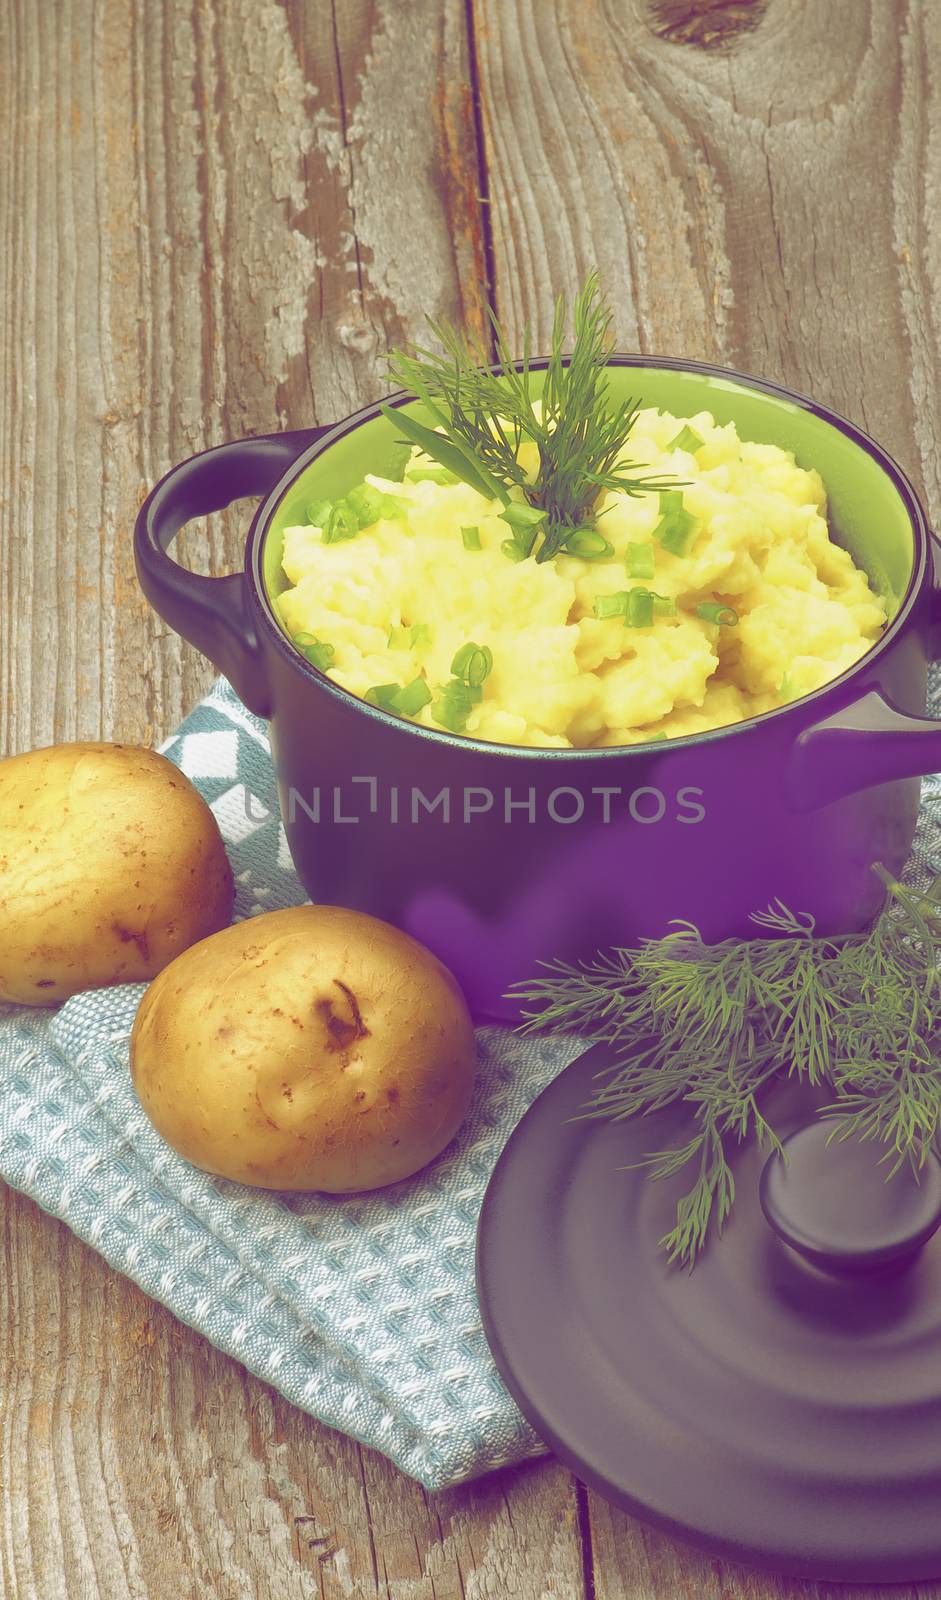 Homemade Mashed Potato with Dill and Spring Onion in Dark Blue Casserole with Lid on Rustic Wooden background. Retro Styled